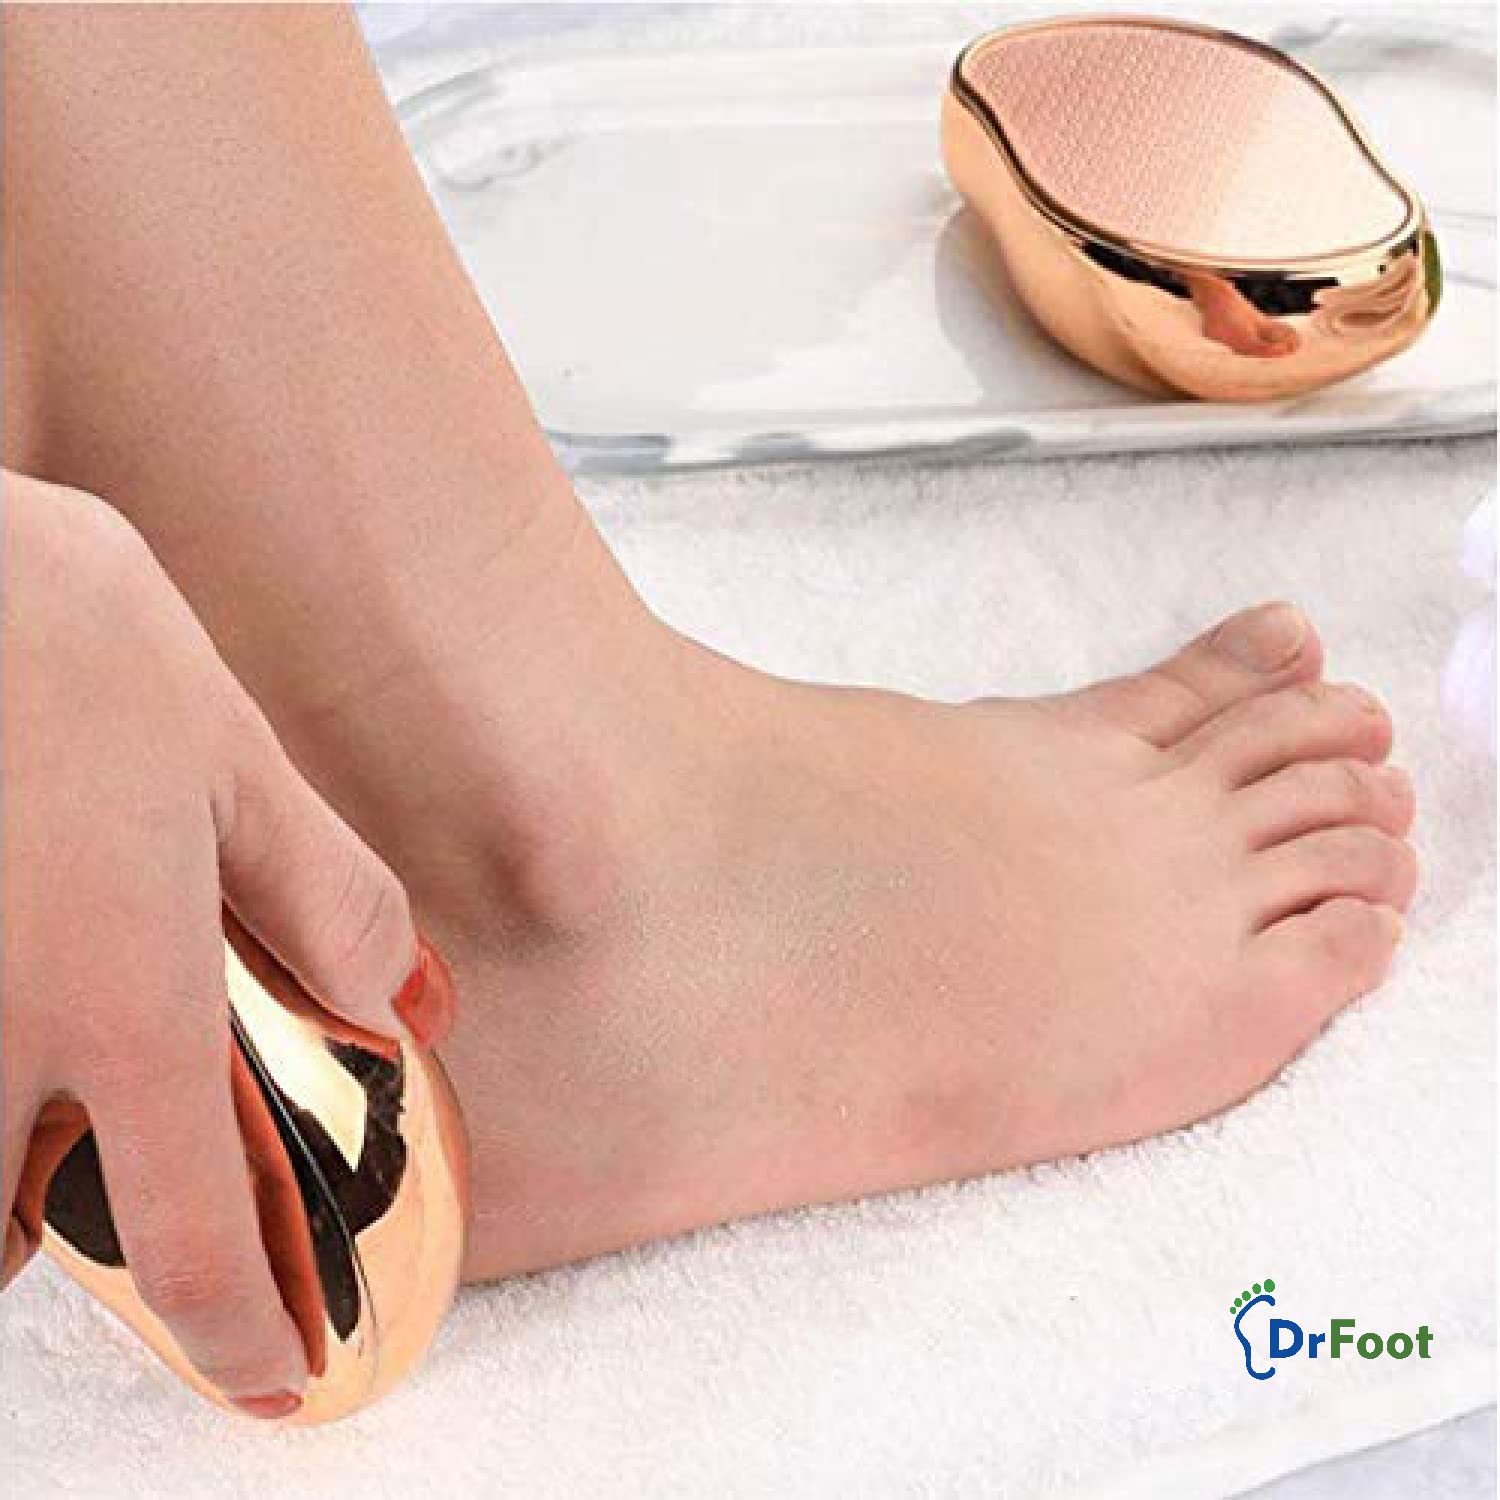  VANWIN Glass Foot File, Callus Remover for Feet Foot Scrubber  Dead Skin Remover with Nano Micro-Abrasive Particles, Foot Rasp Heel Scraper  Hard Skin Remover Foot Care Pedicure Tool on Wet